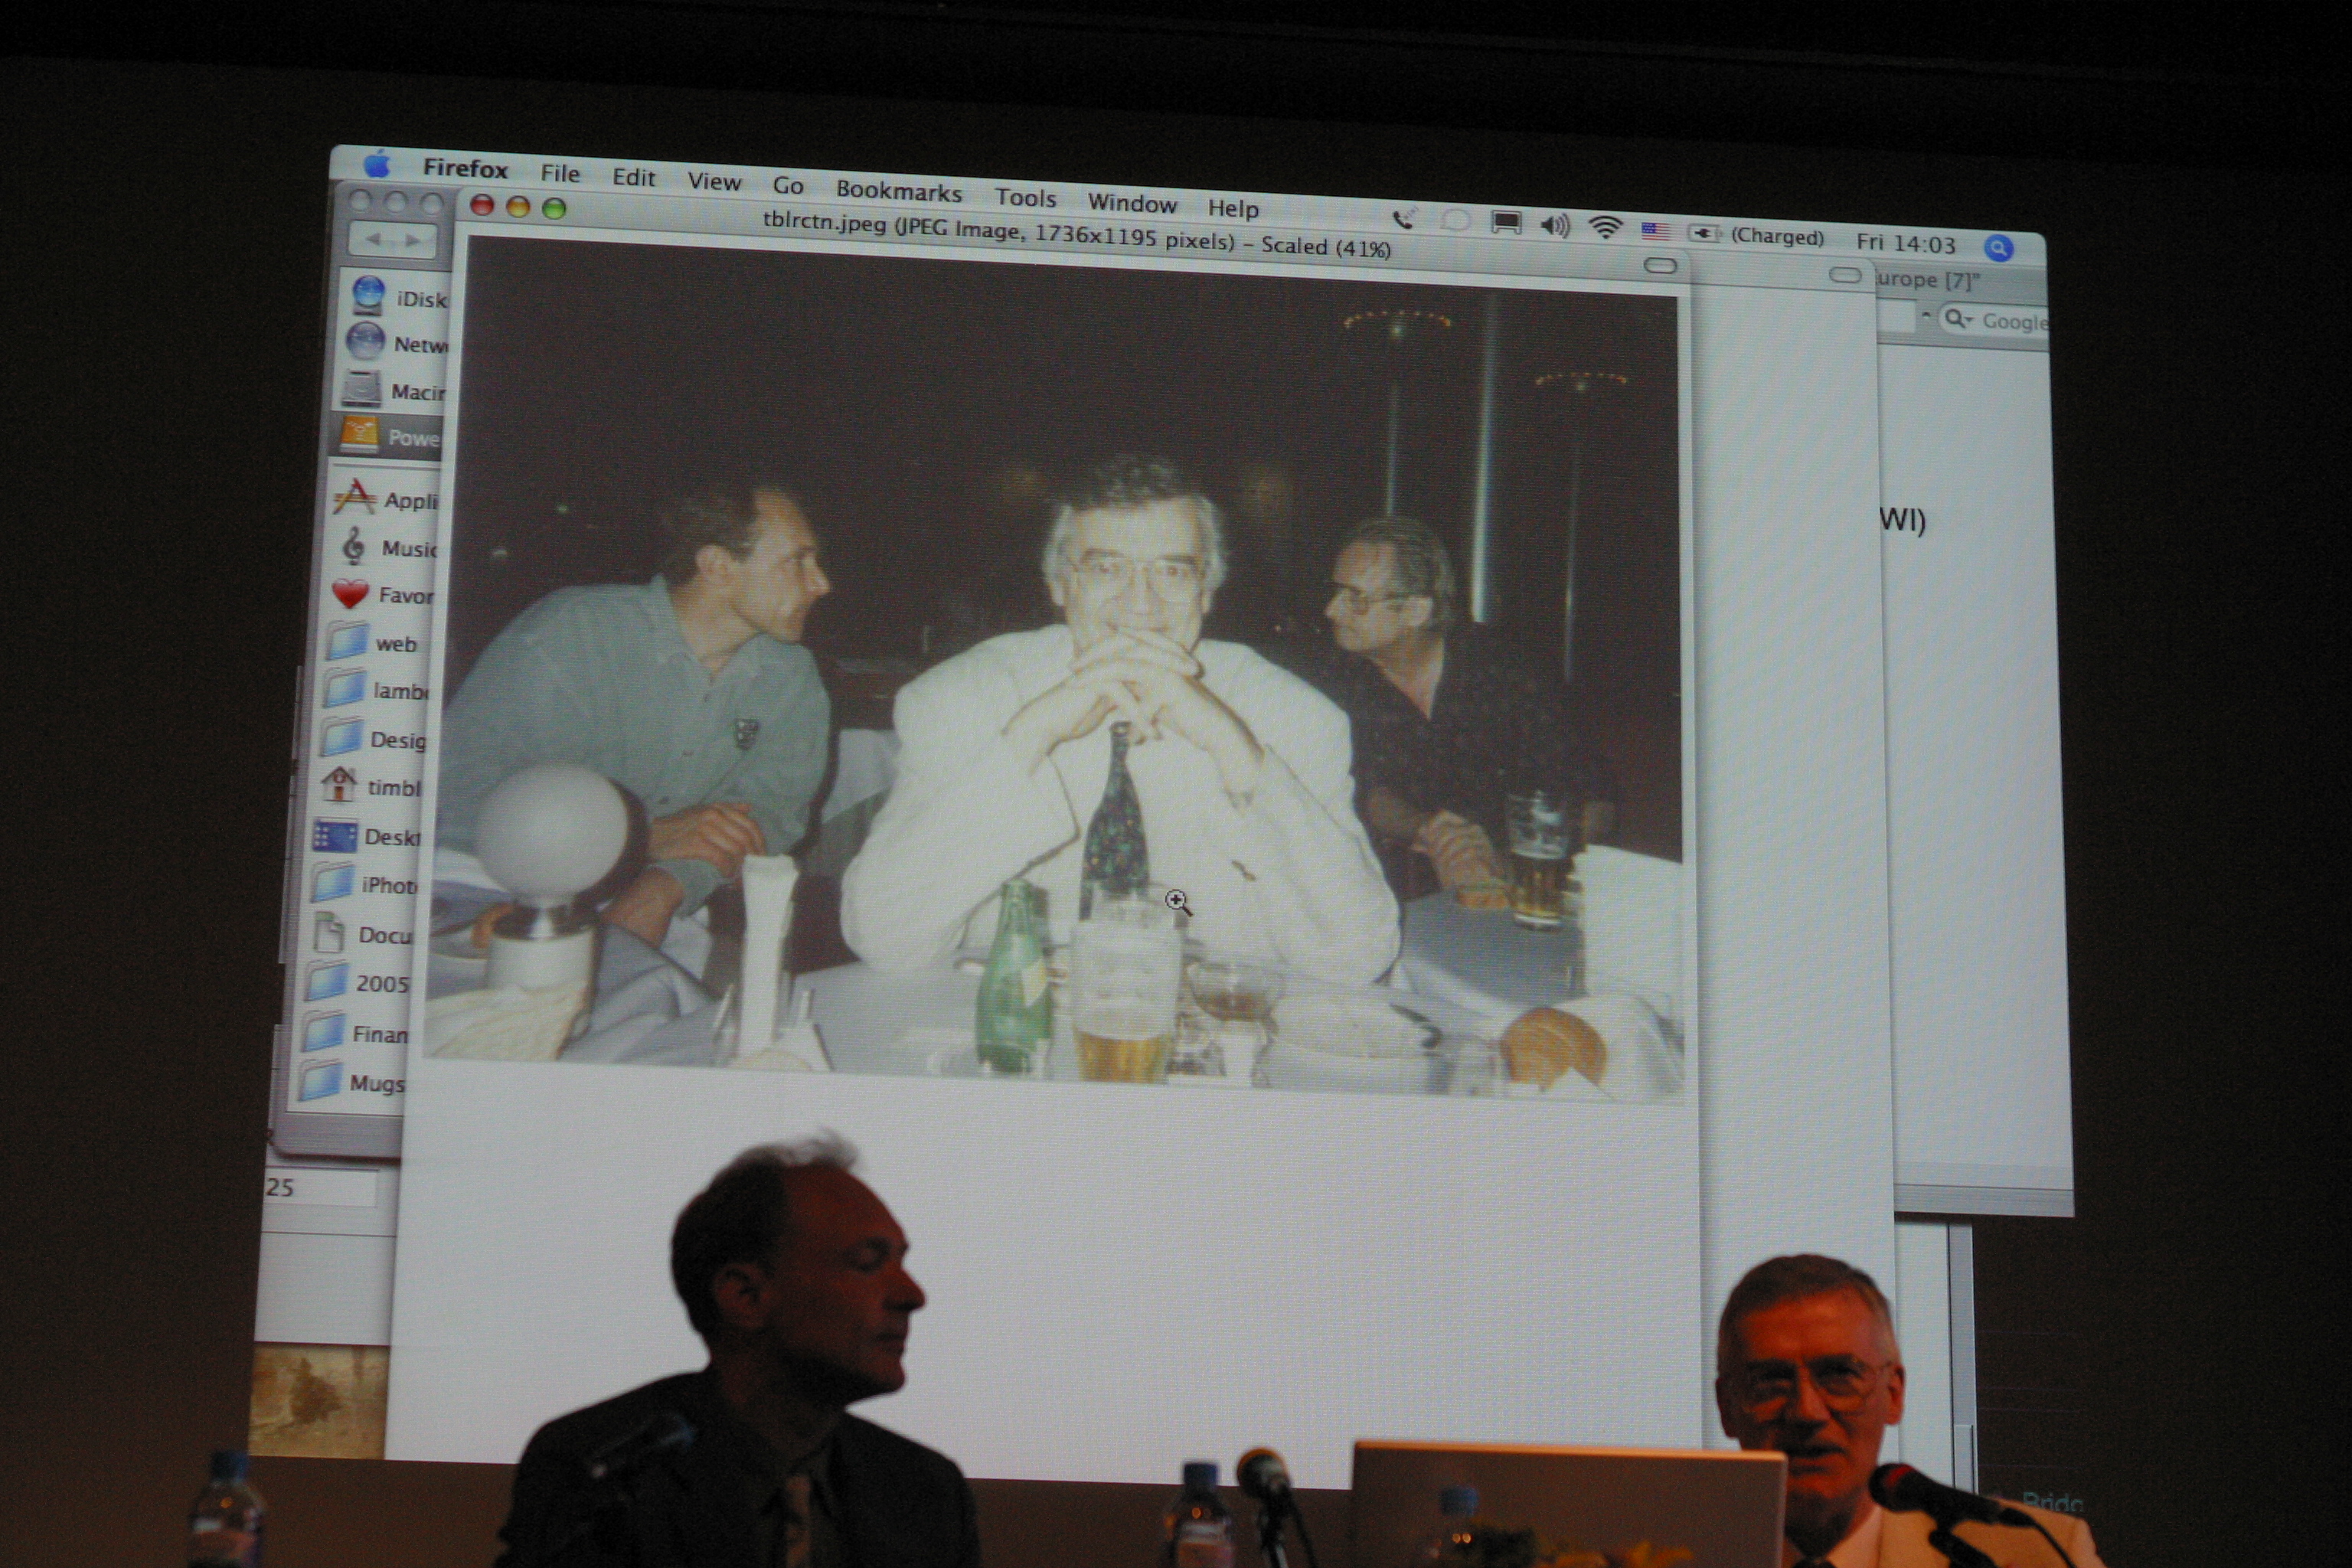 [photo: Tim Berners-Lee and Robert
  Cailliau on a stage in front of a photo of Ted Nelson talking with
  Tim and Robert looking into the camera]